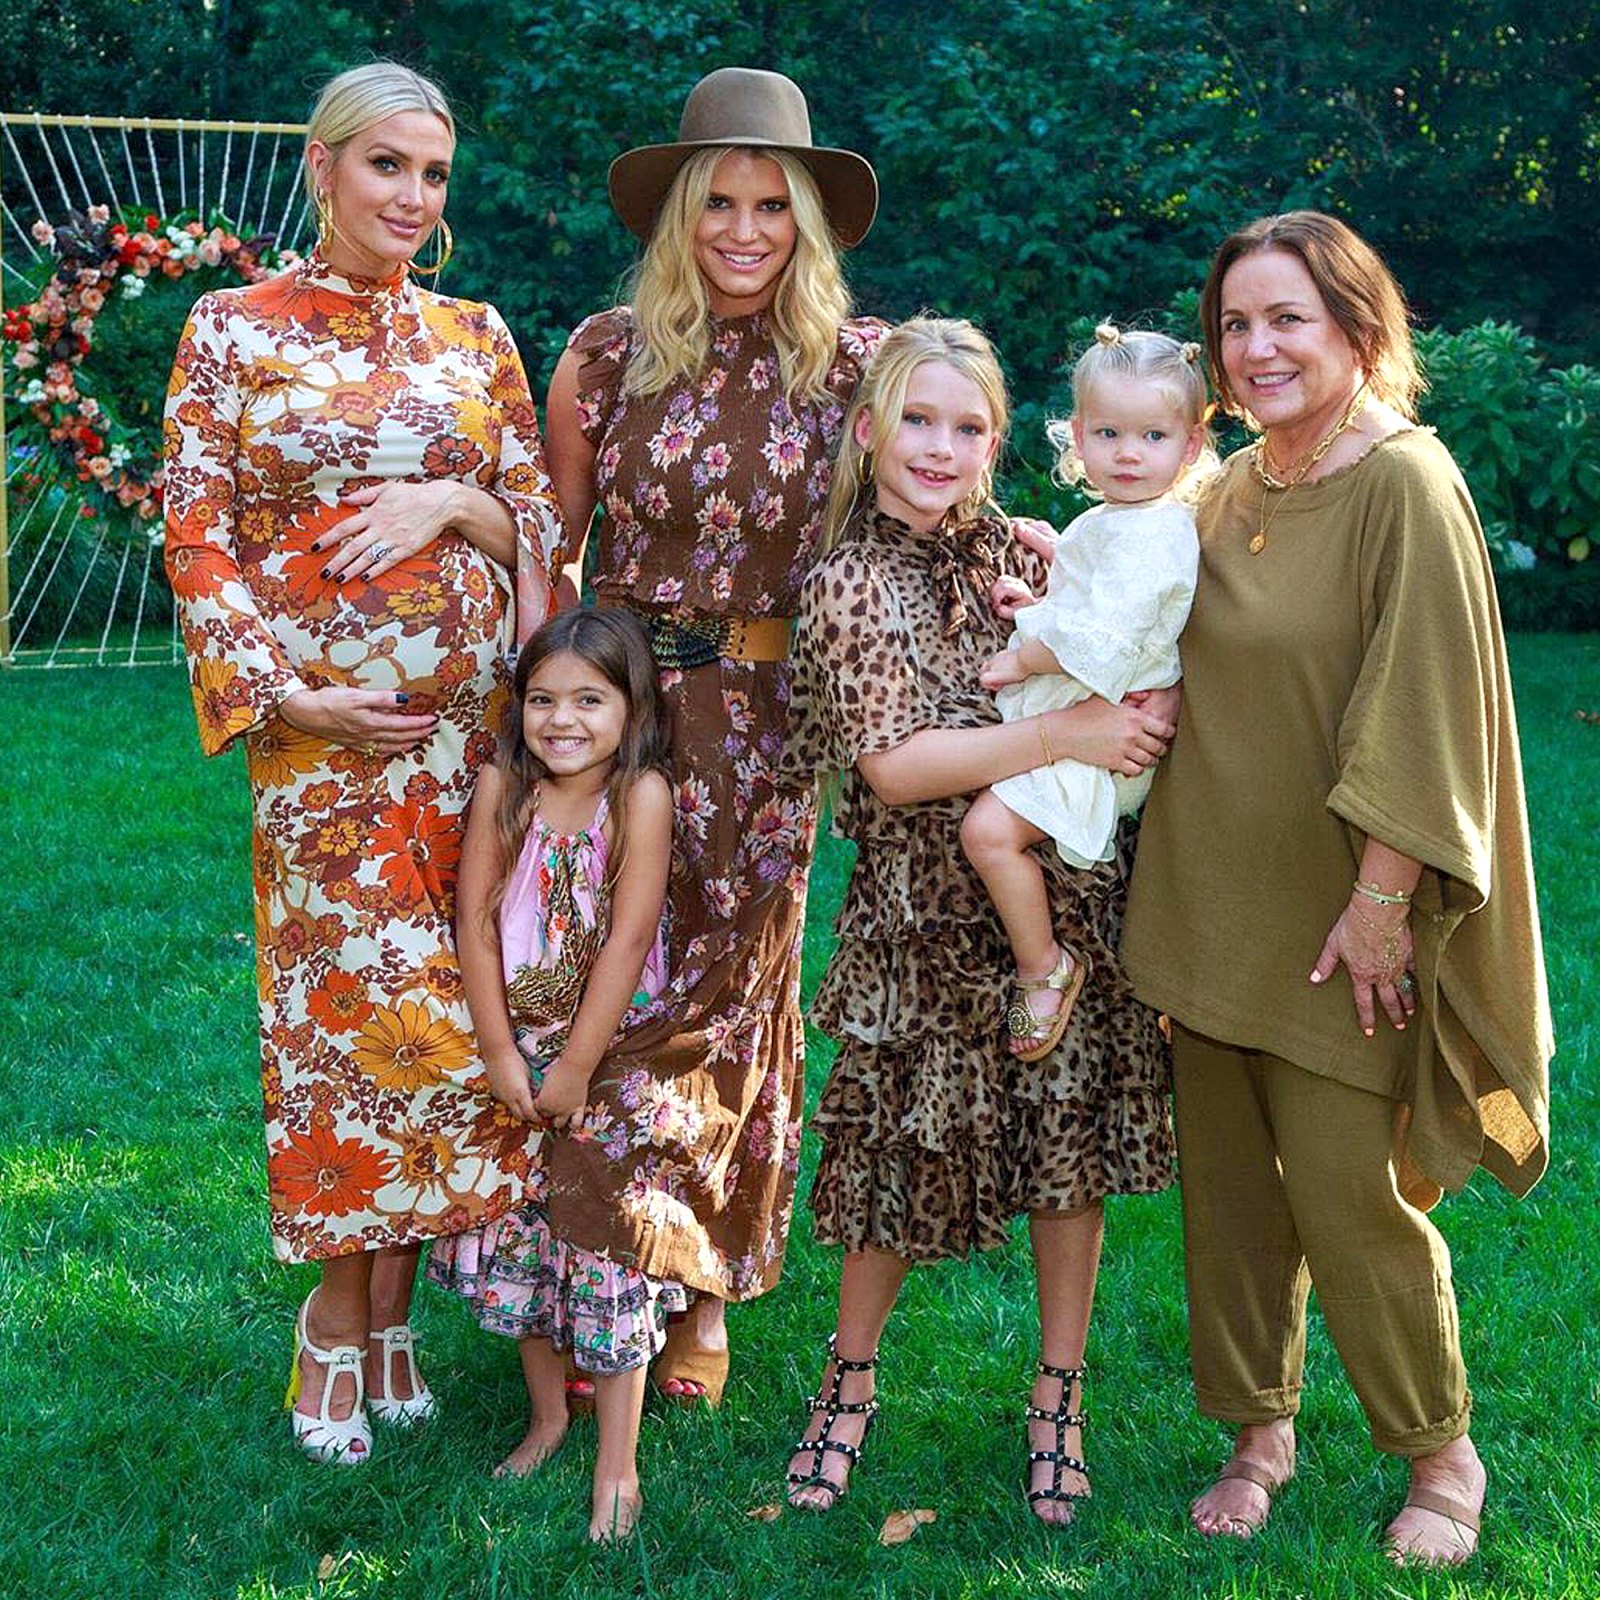 Pregnant Ashlee Simpson Celebrates Baby Shower Ahead 3rd Child With Jessica Simpson